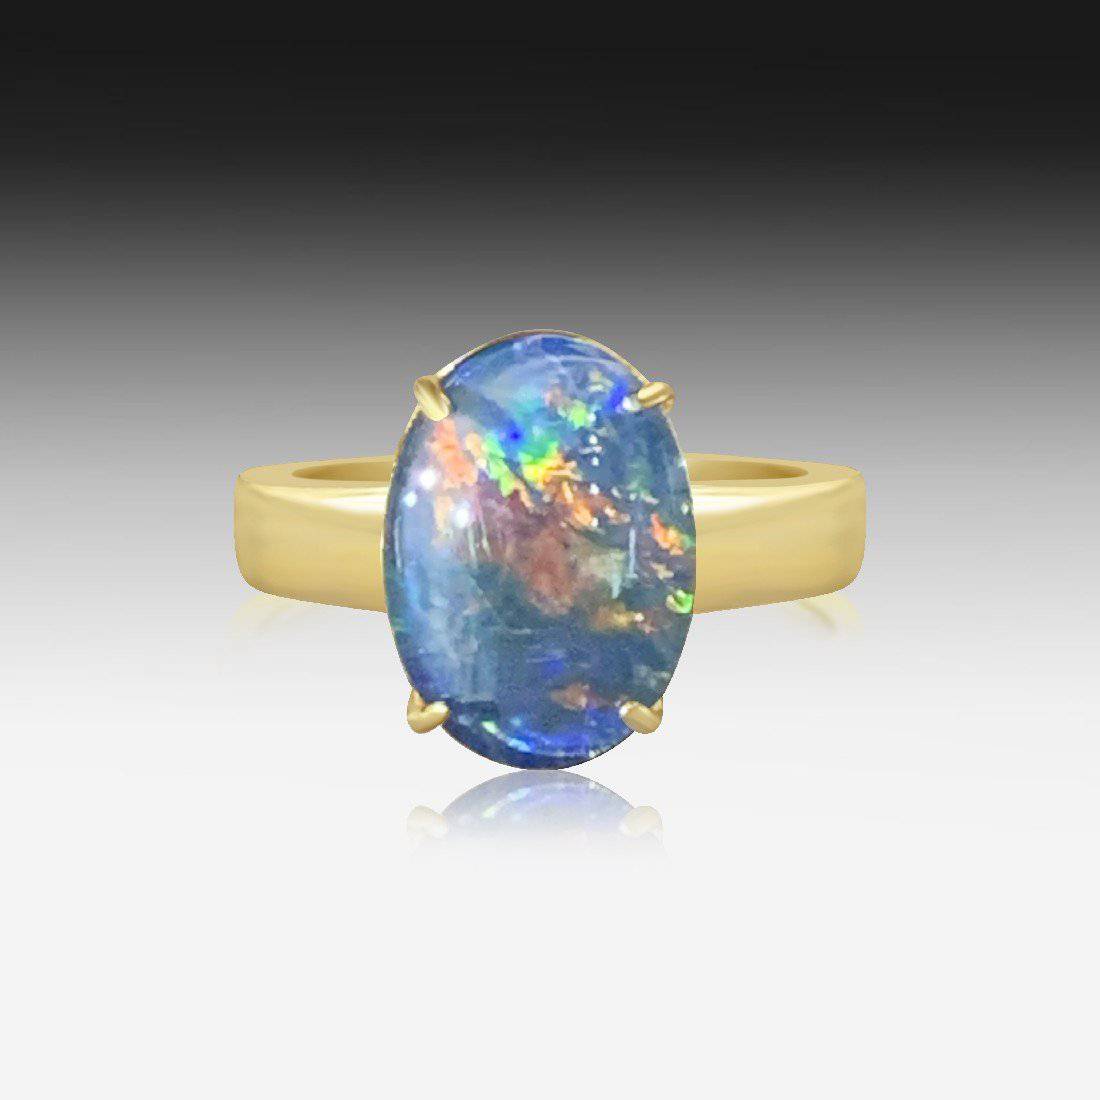 Sterling Silver Gold Plated Solitaire Opal Triplet ring - Masterpiece Jewellery Opal & Gems Sydney Australia | Online Shop